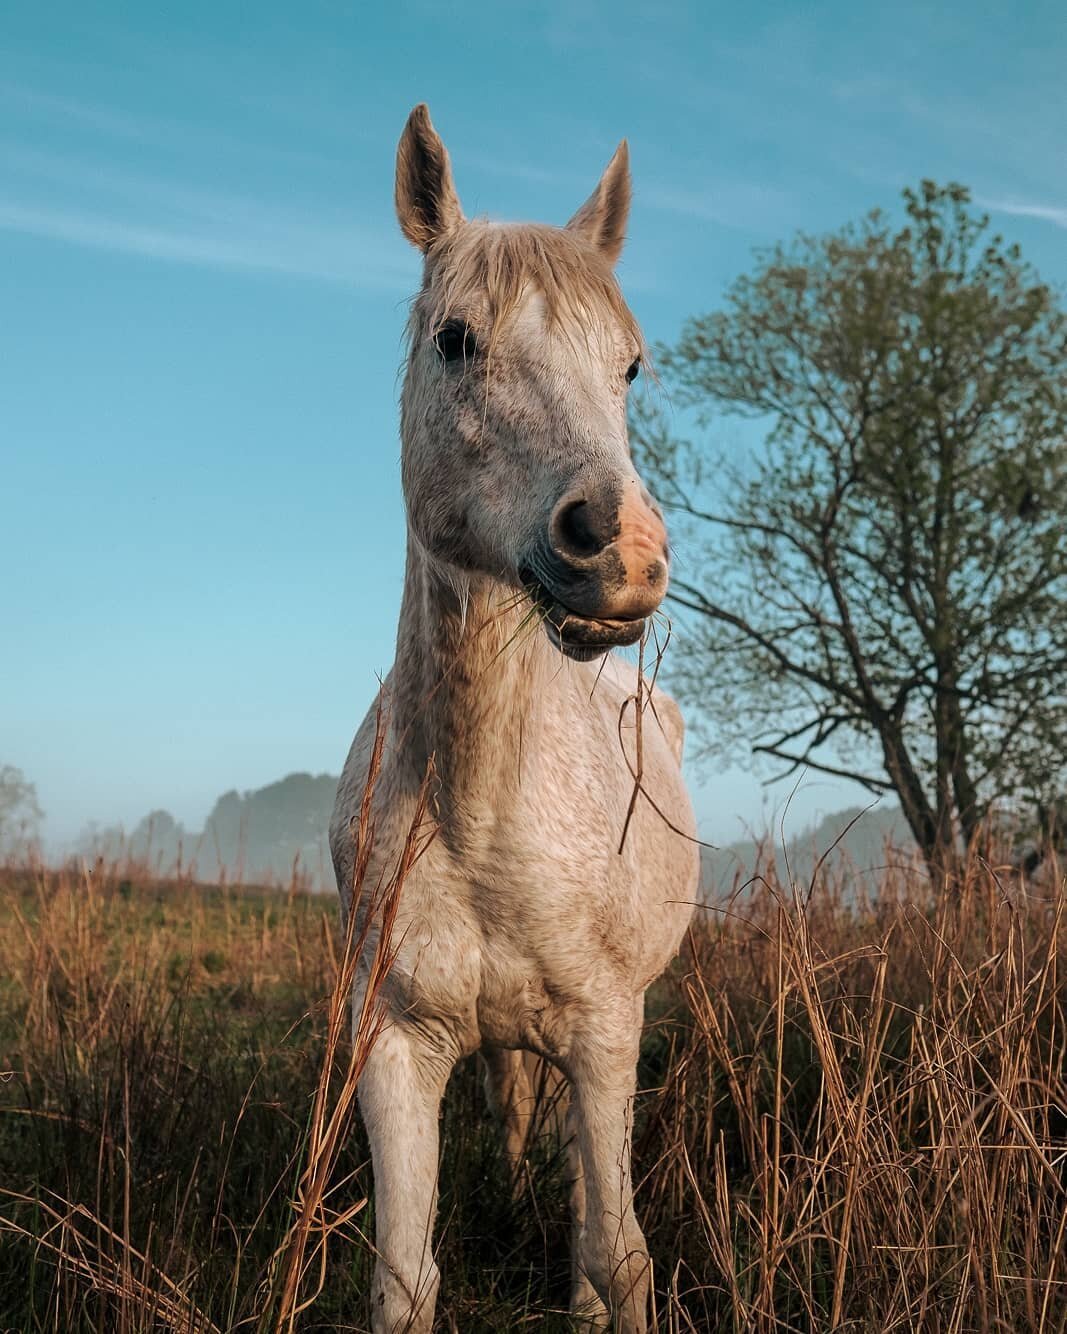 Currently missing the early mornings of letting the dogs out, grabbing a camera or two, and walking around the pasture grabbing shots of the horses as they grazed. It was so quiet and peaceful. And Ramona loved the attention so much, she would mouth 